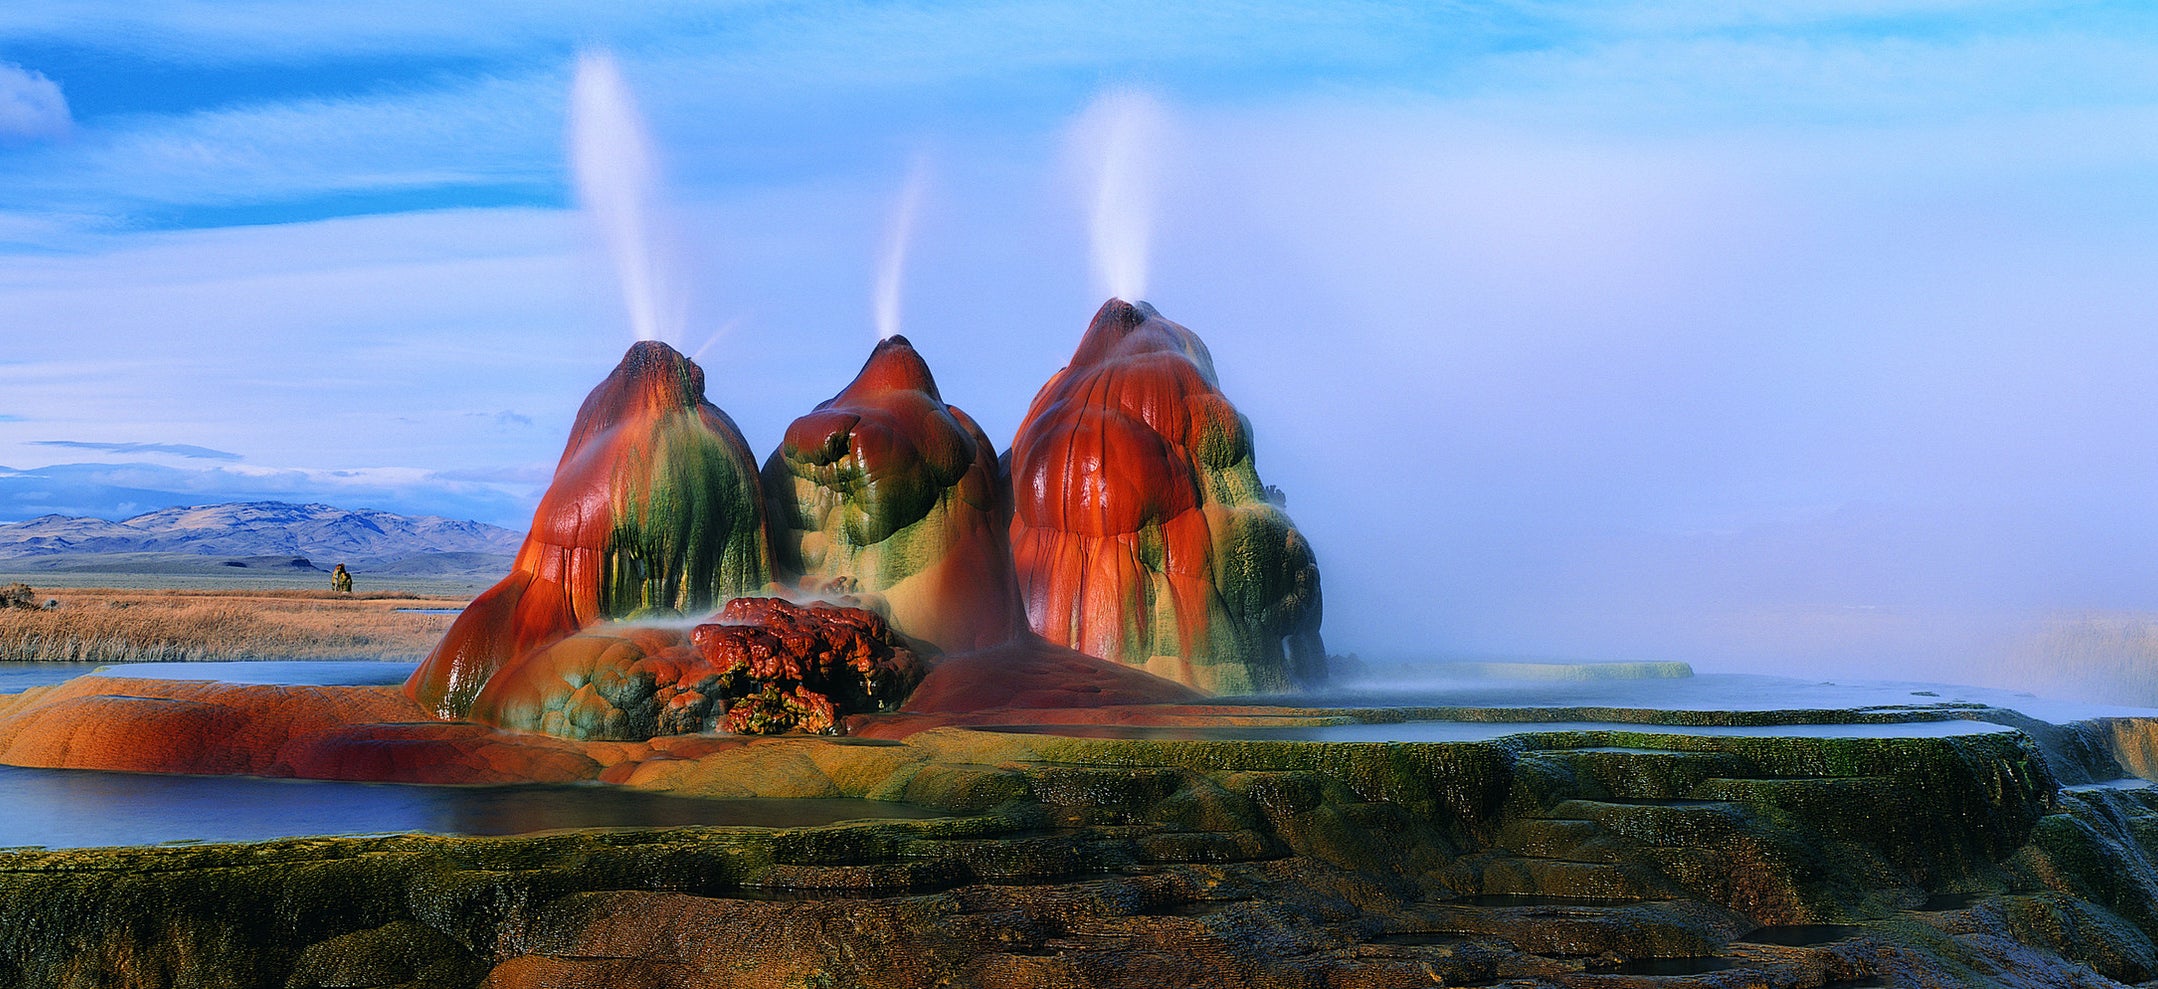 water spouting from the geyser